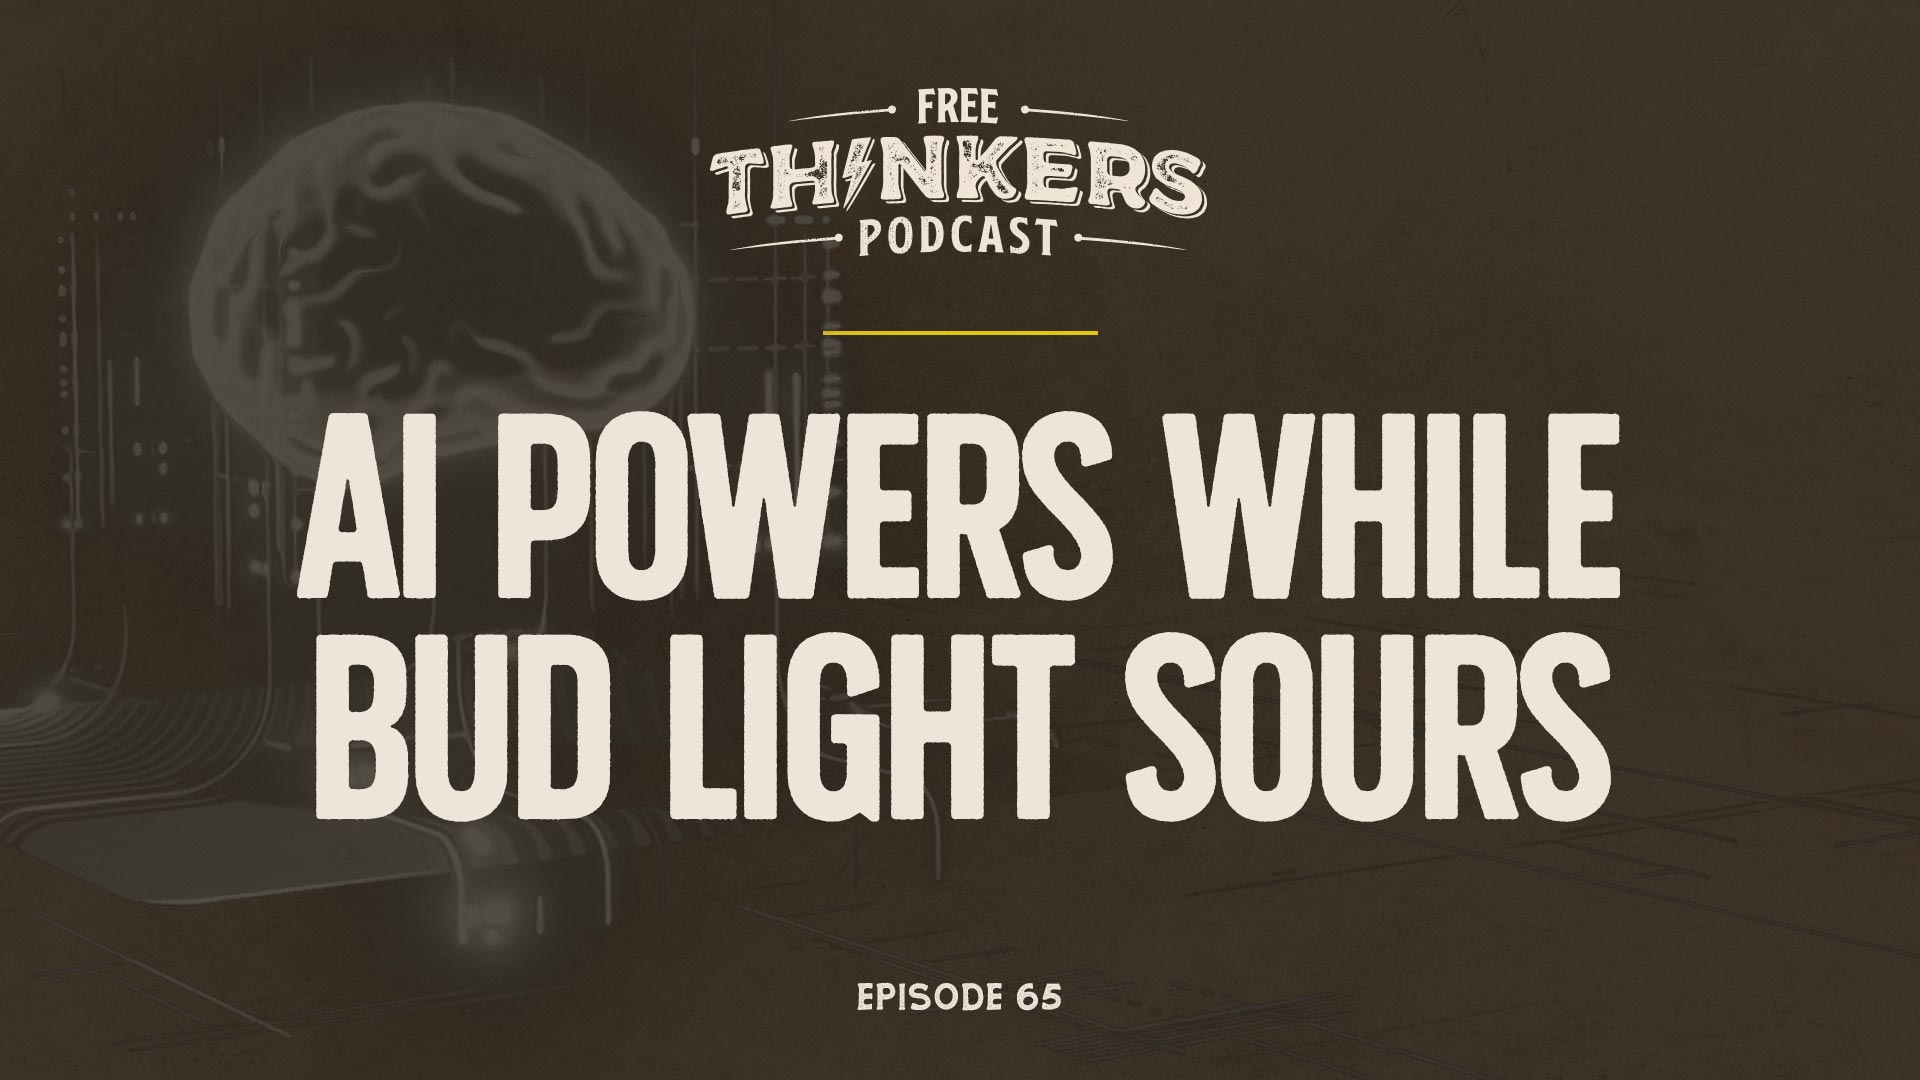 Free Thinkers Episode 65